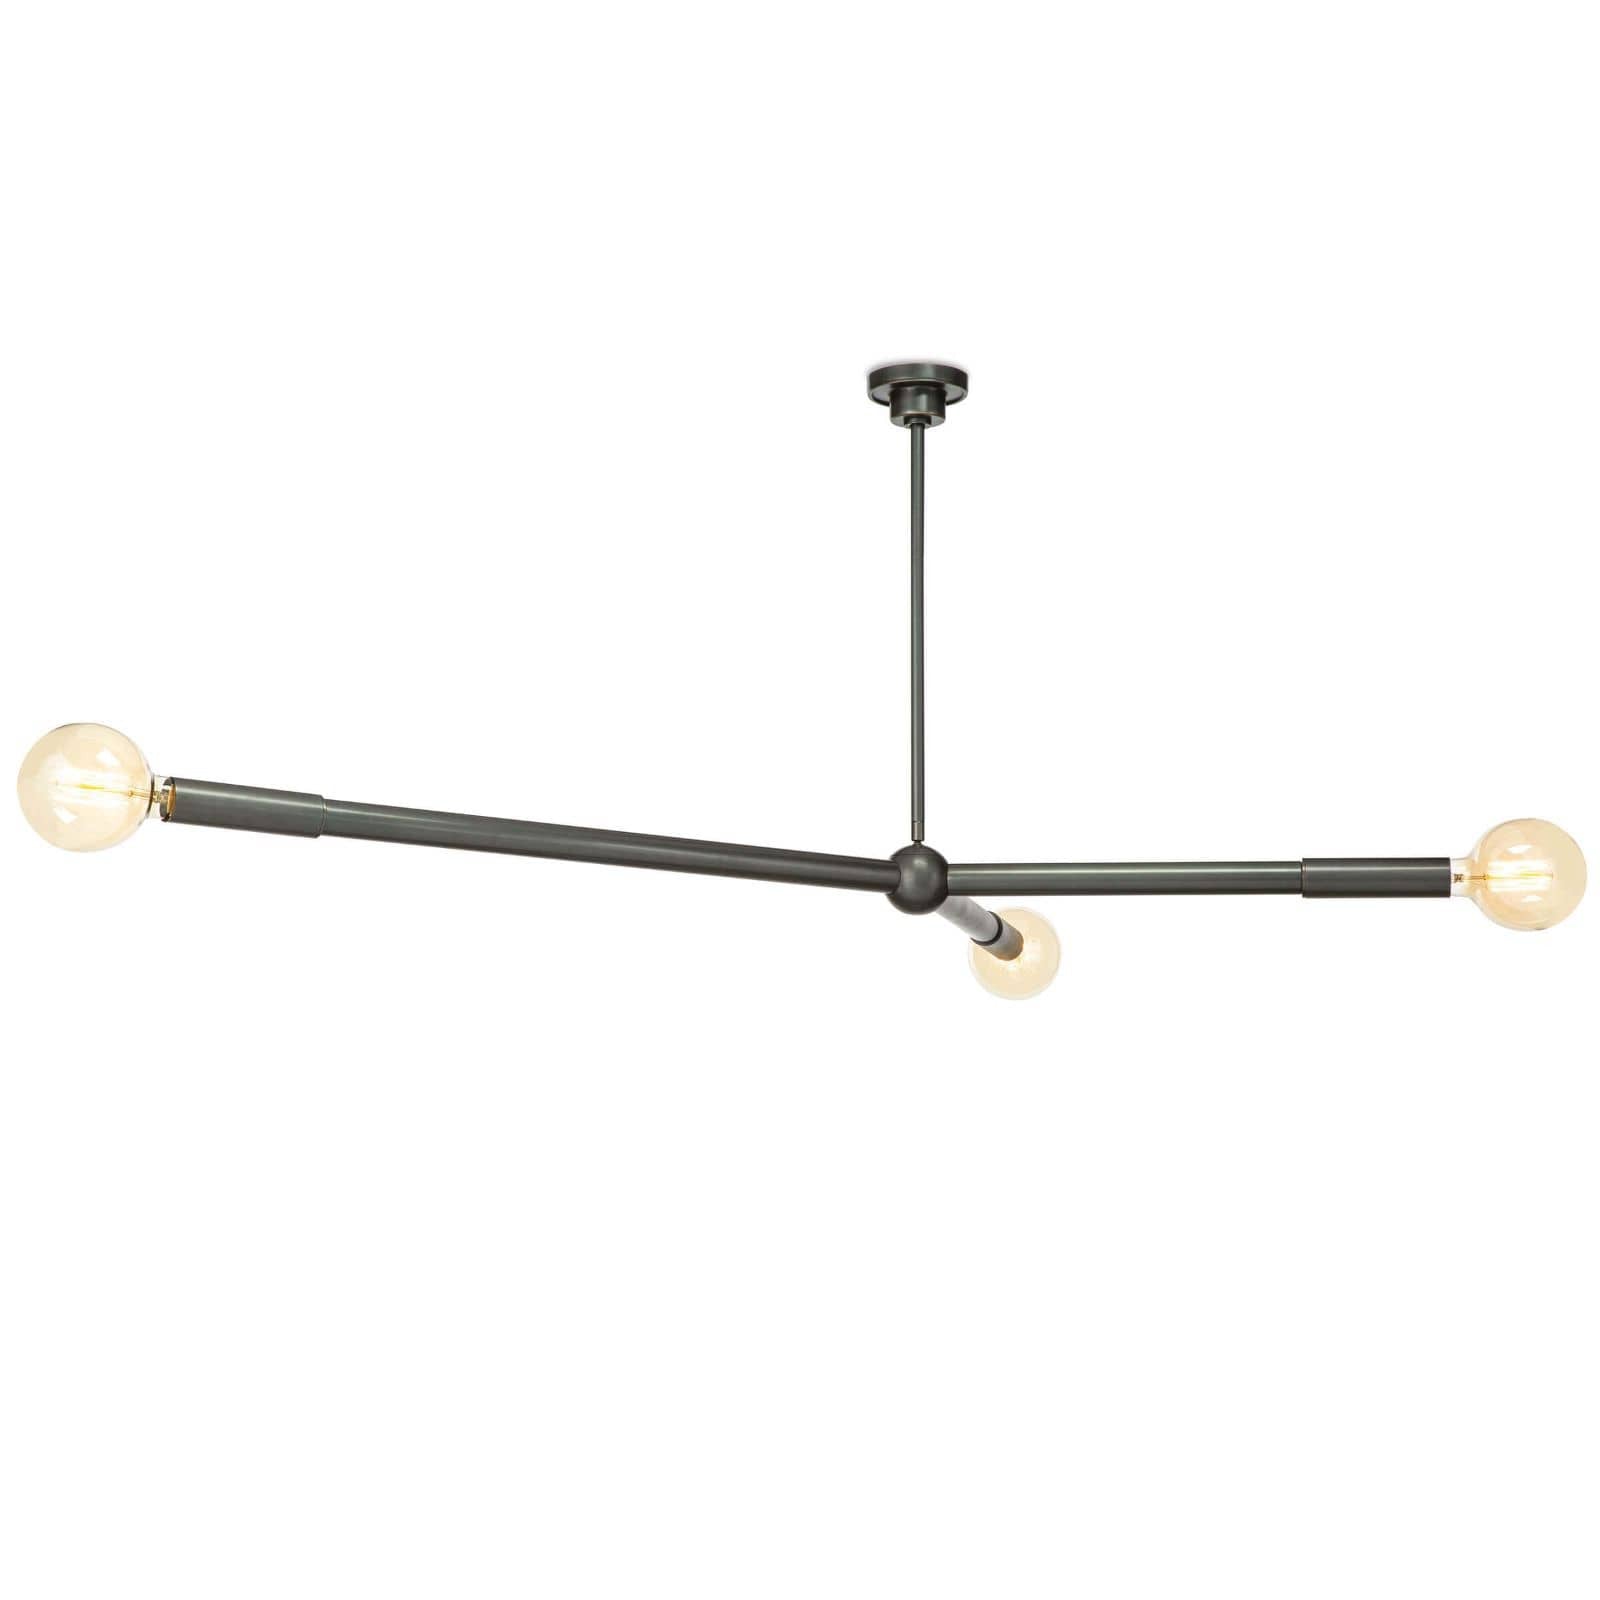 We love that the thin arms of this Talon Chandelier can be angled up or down from its spherical base. Place over your dining table or kitchen island and complete elevate your space!